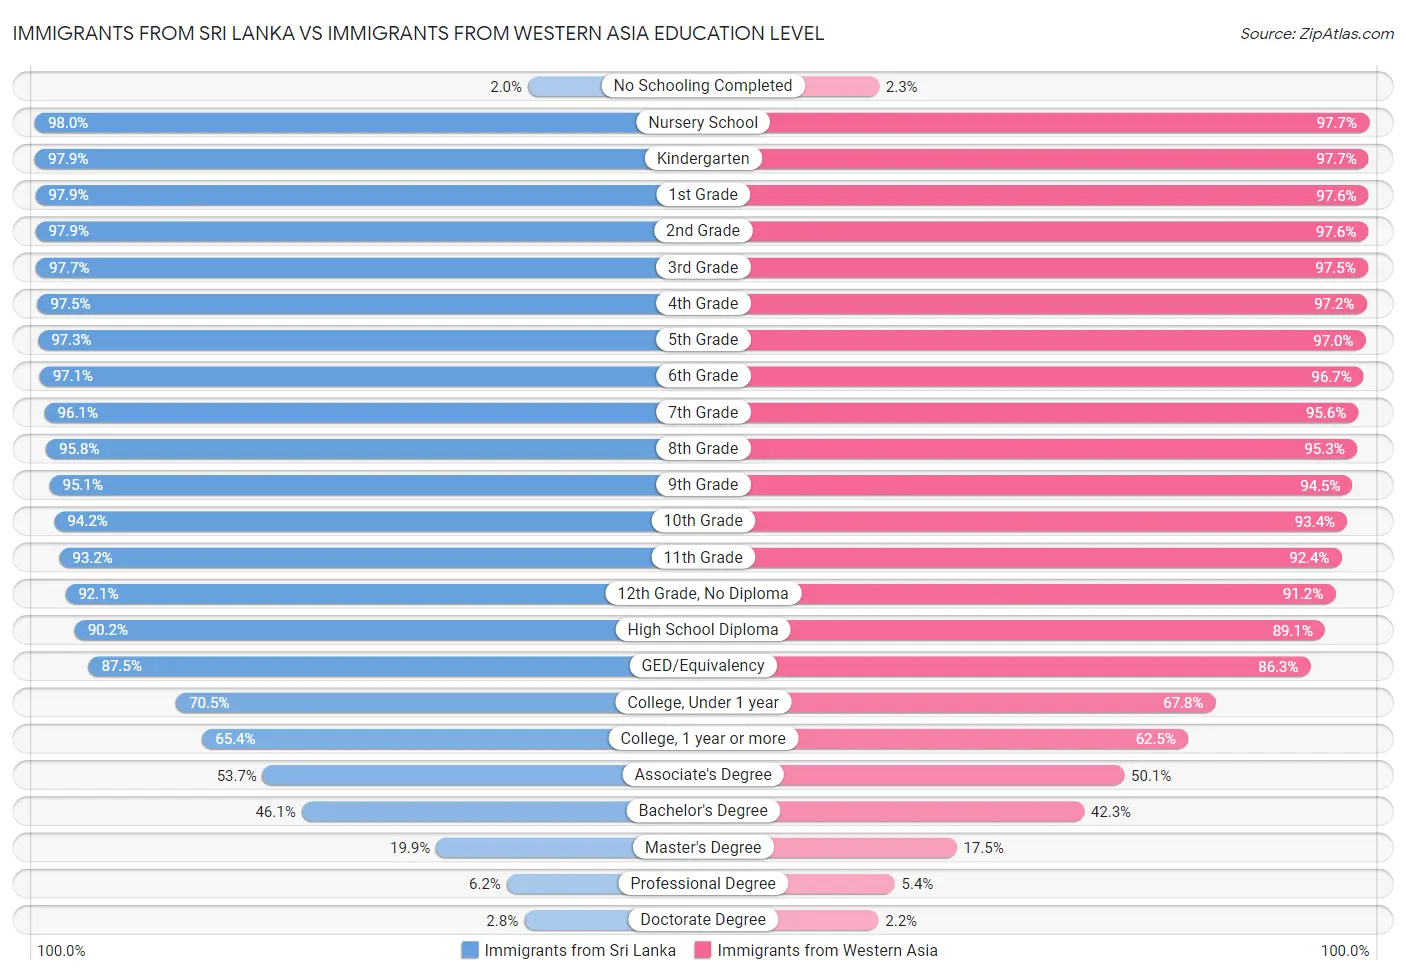 Immigrants from Sri Lanka vs Immigrants from Western Asia Education Level